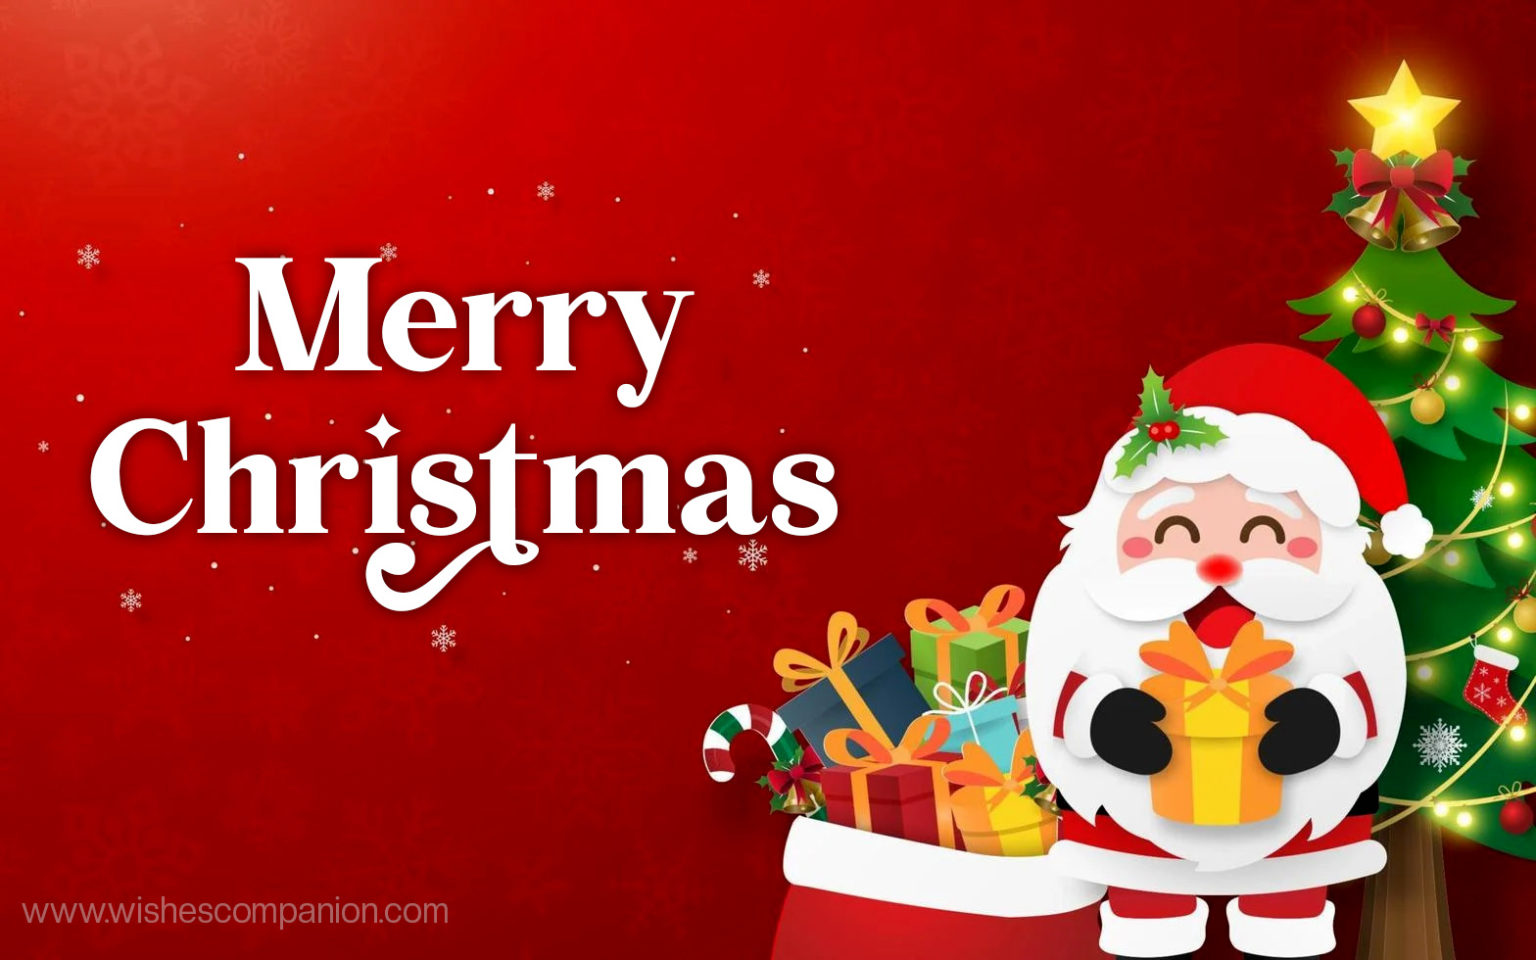 40+ Best Christmas Wishes and Images for your Loved Once Wishes Companion